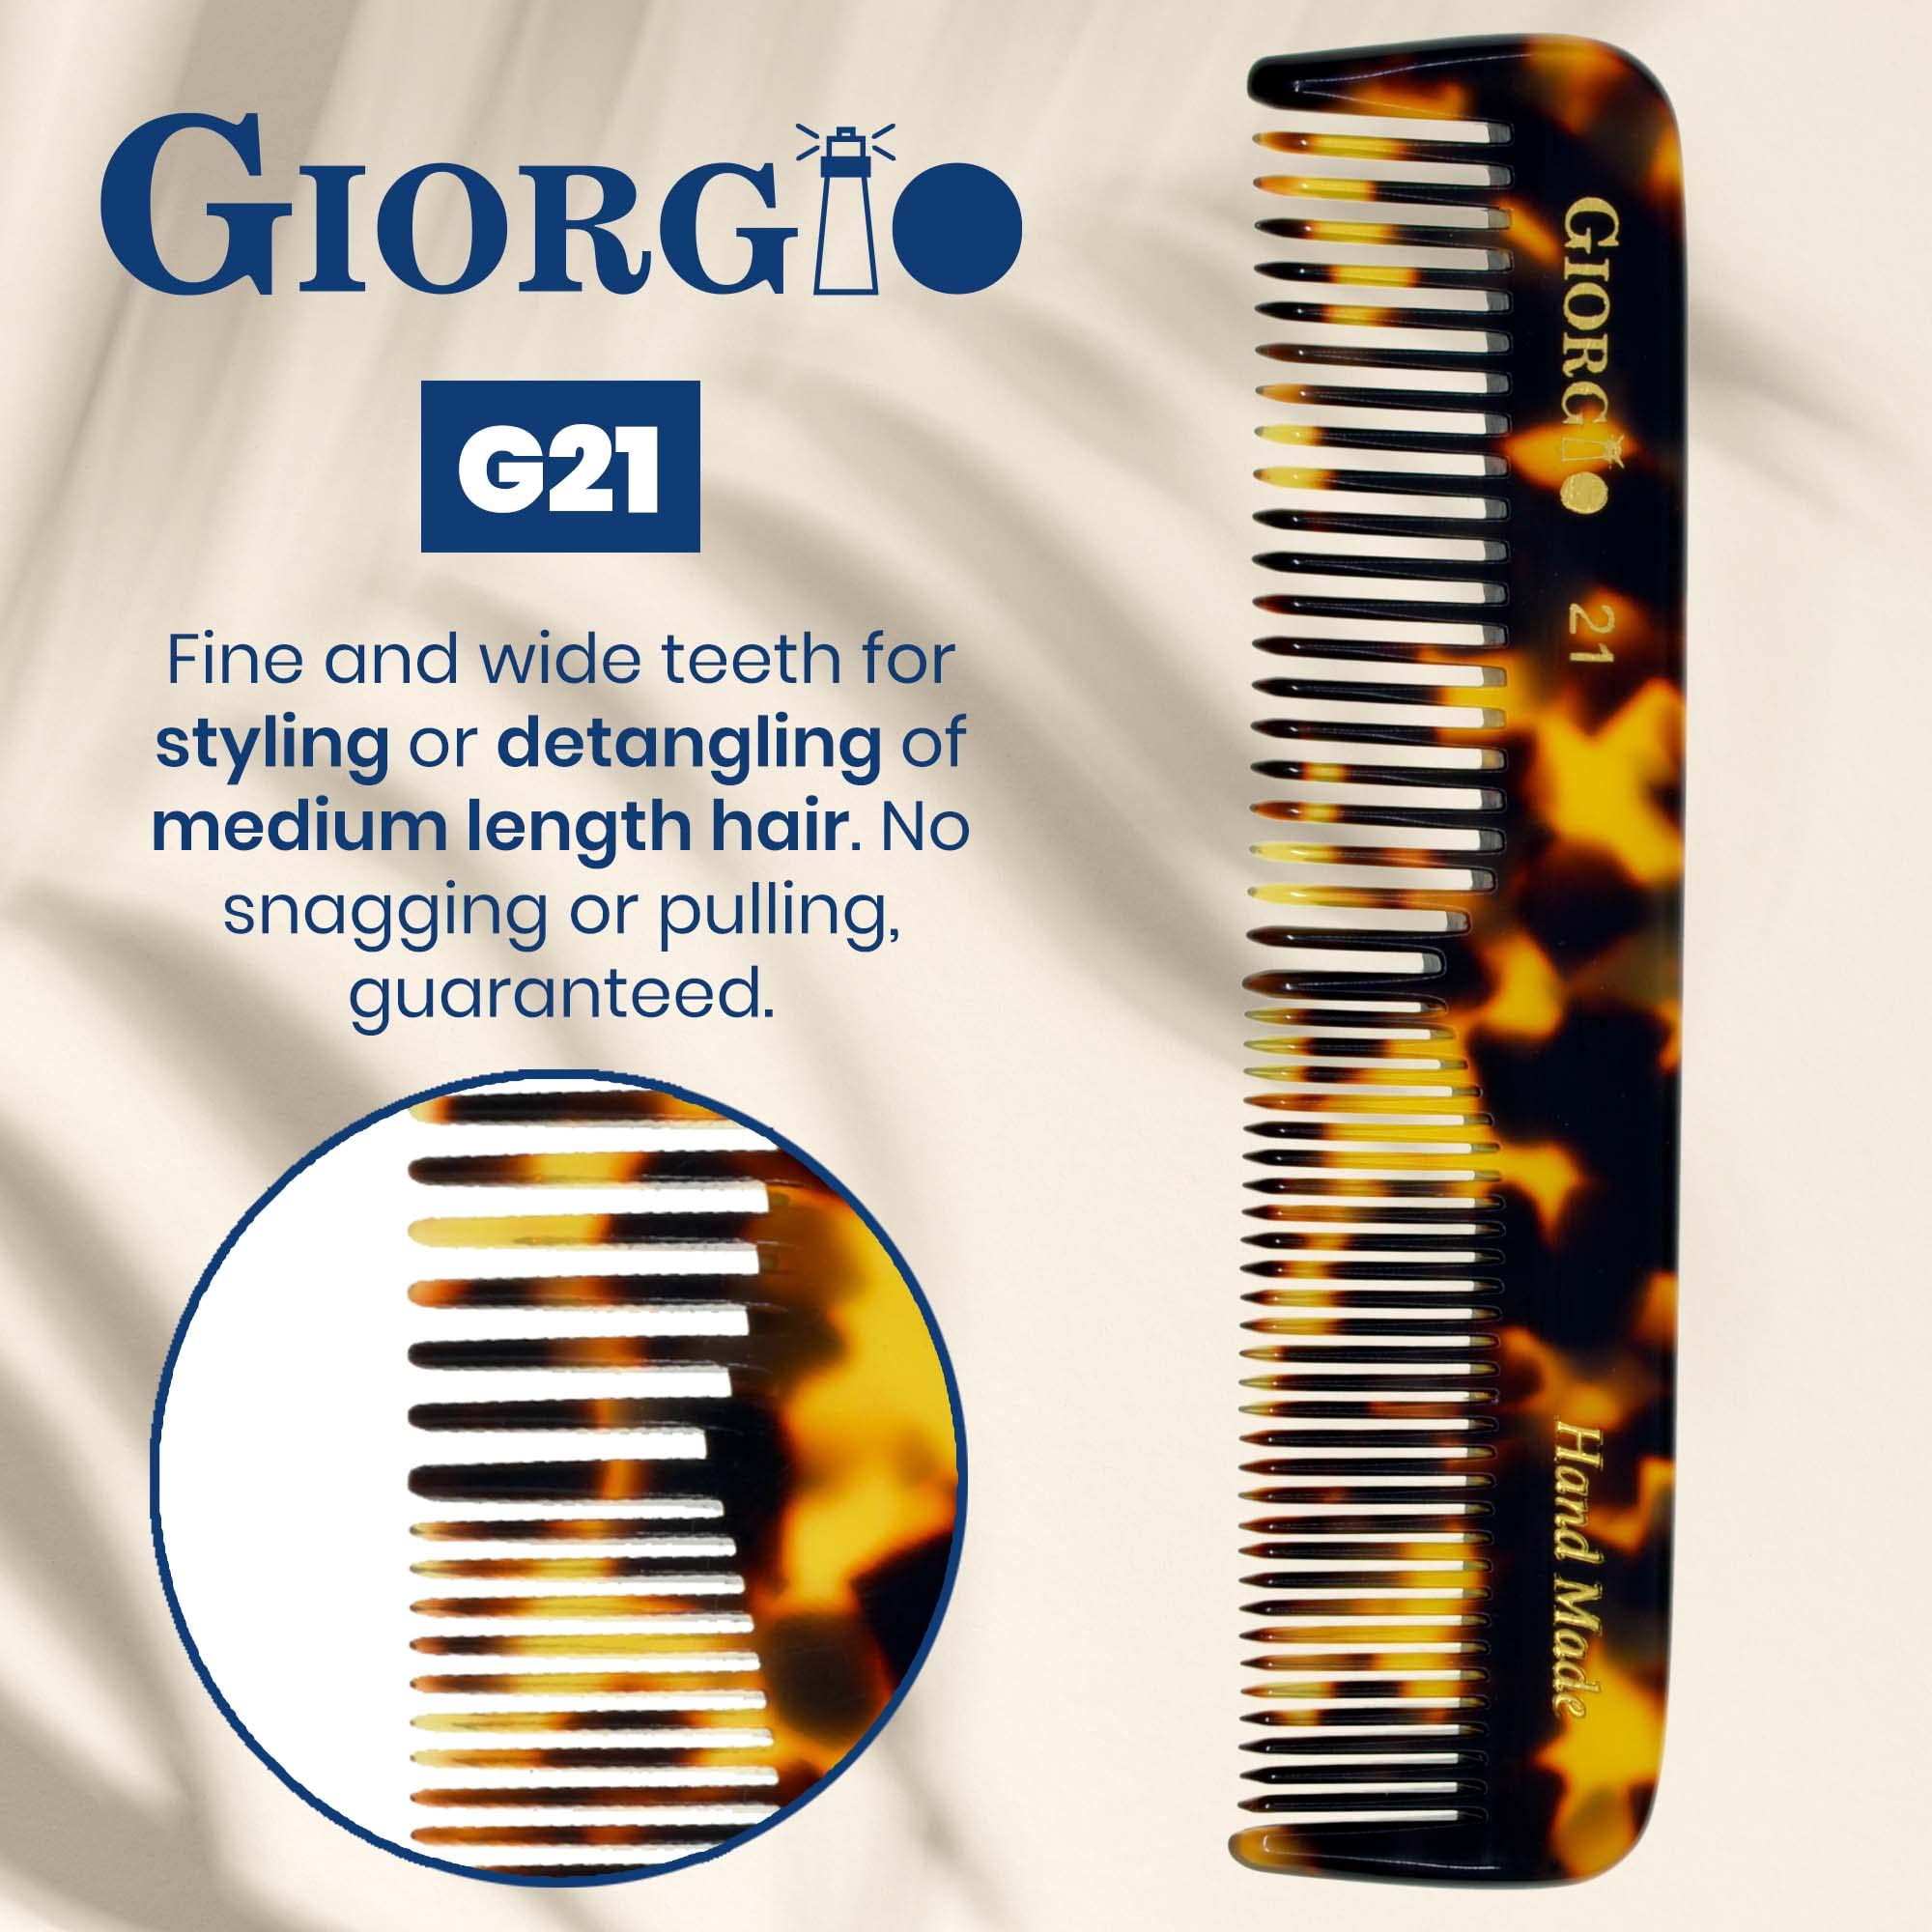 Giorgio G21 Fine Tooth and Wide Tooth Pocket Comb - 4.5" Hair Styling Comb for Men, Travel Hair Comb for Women, Handmade Beard C